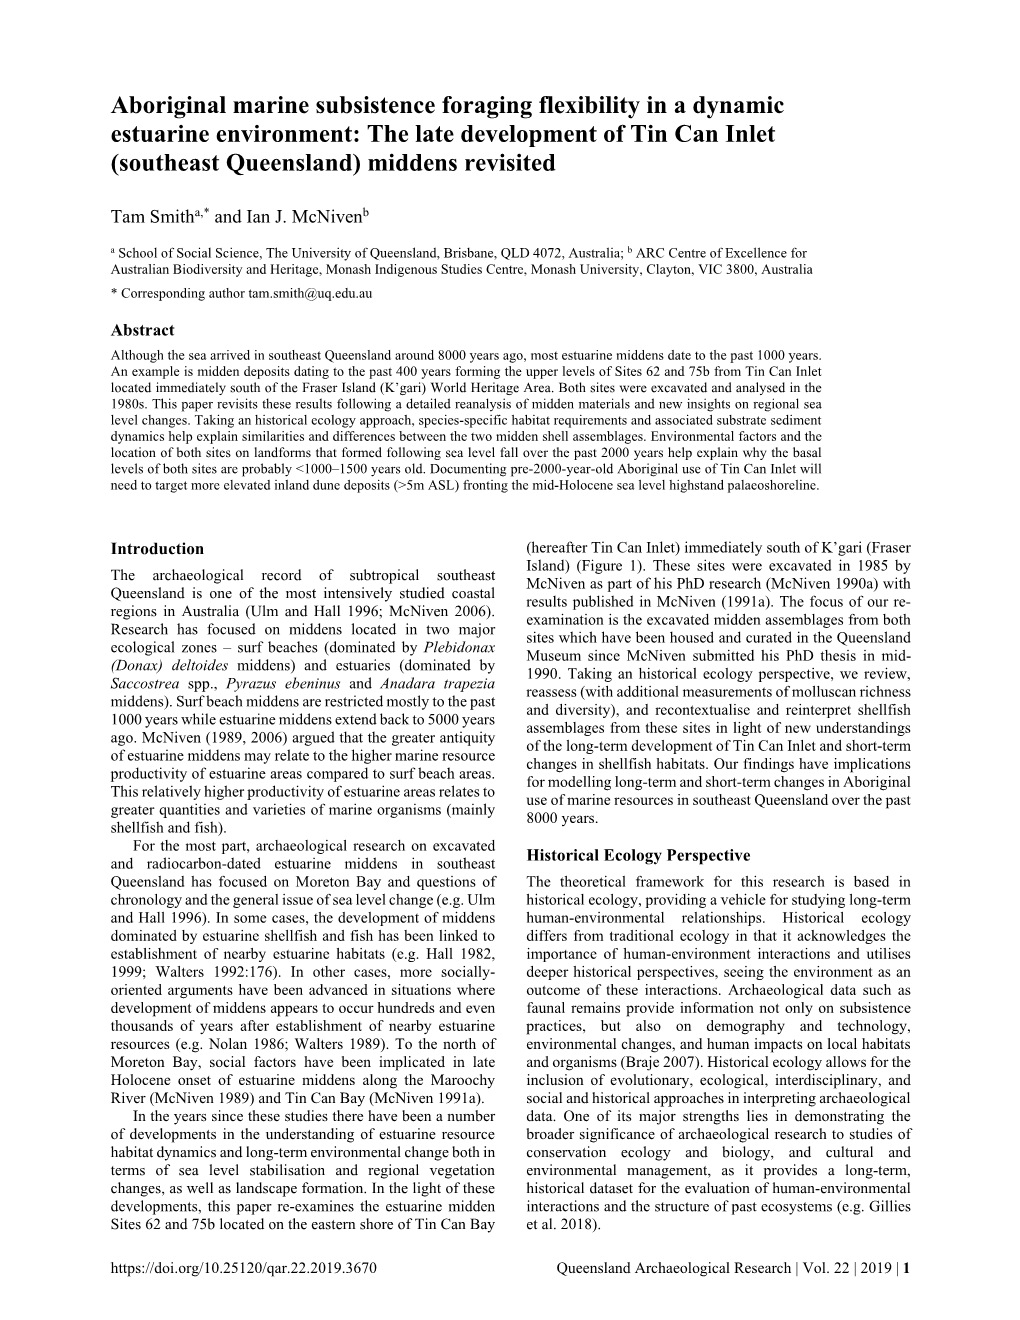 The Late Development of Tin Can Inlet (Southeast Queensland) Middens Revisited